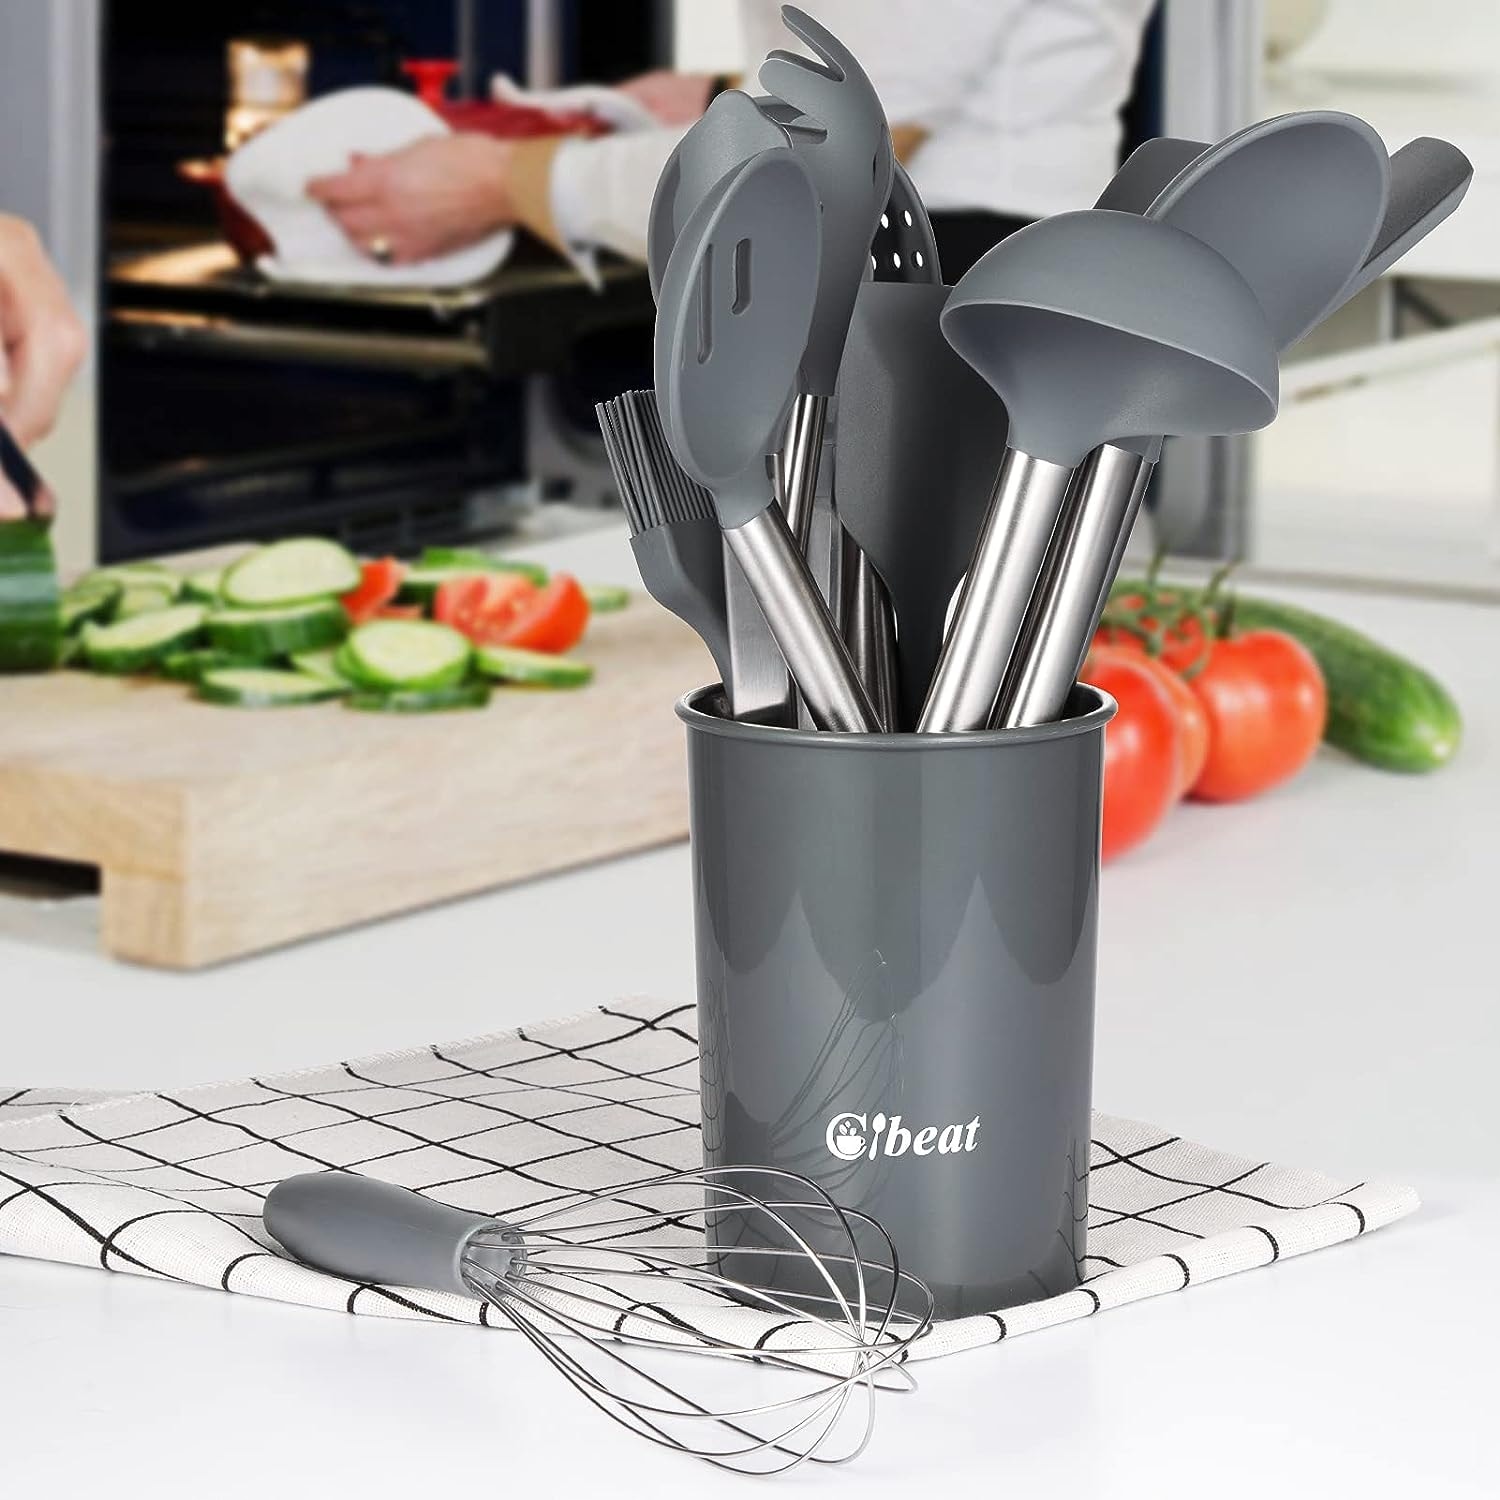 https://ak1.ostkcdn.com/images/products/is/images/direct/f222c95fe7e76a146f1708e4b3bc0059bb90028e/Kitchen-Utensils-Set-with-Holder%2C-Silicone-Cooking-Utensils-Gadget.jpg